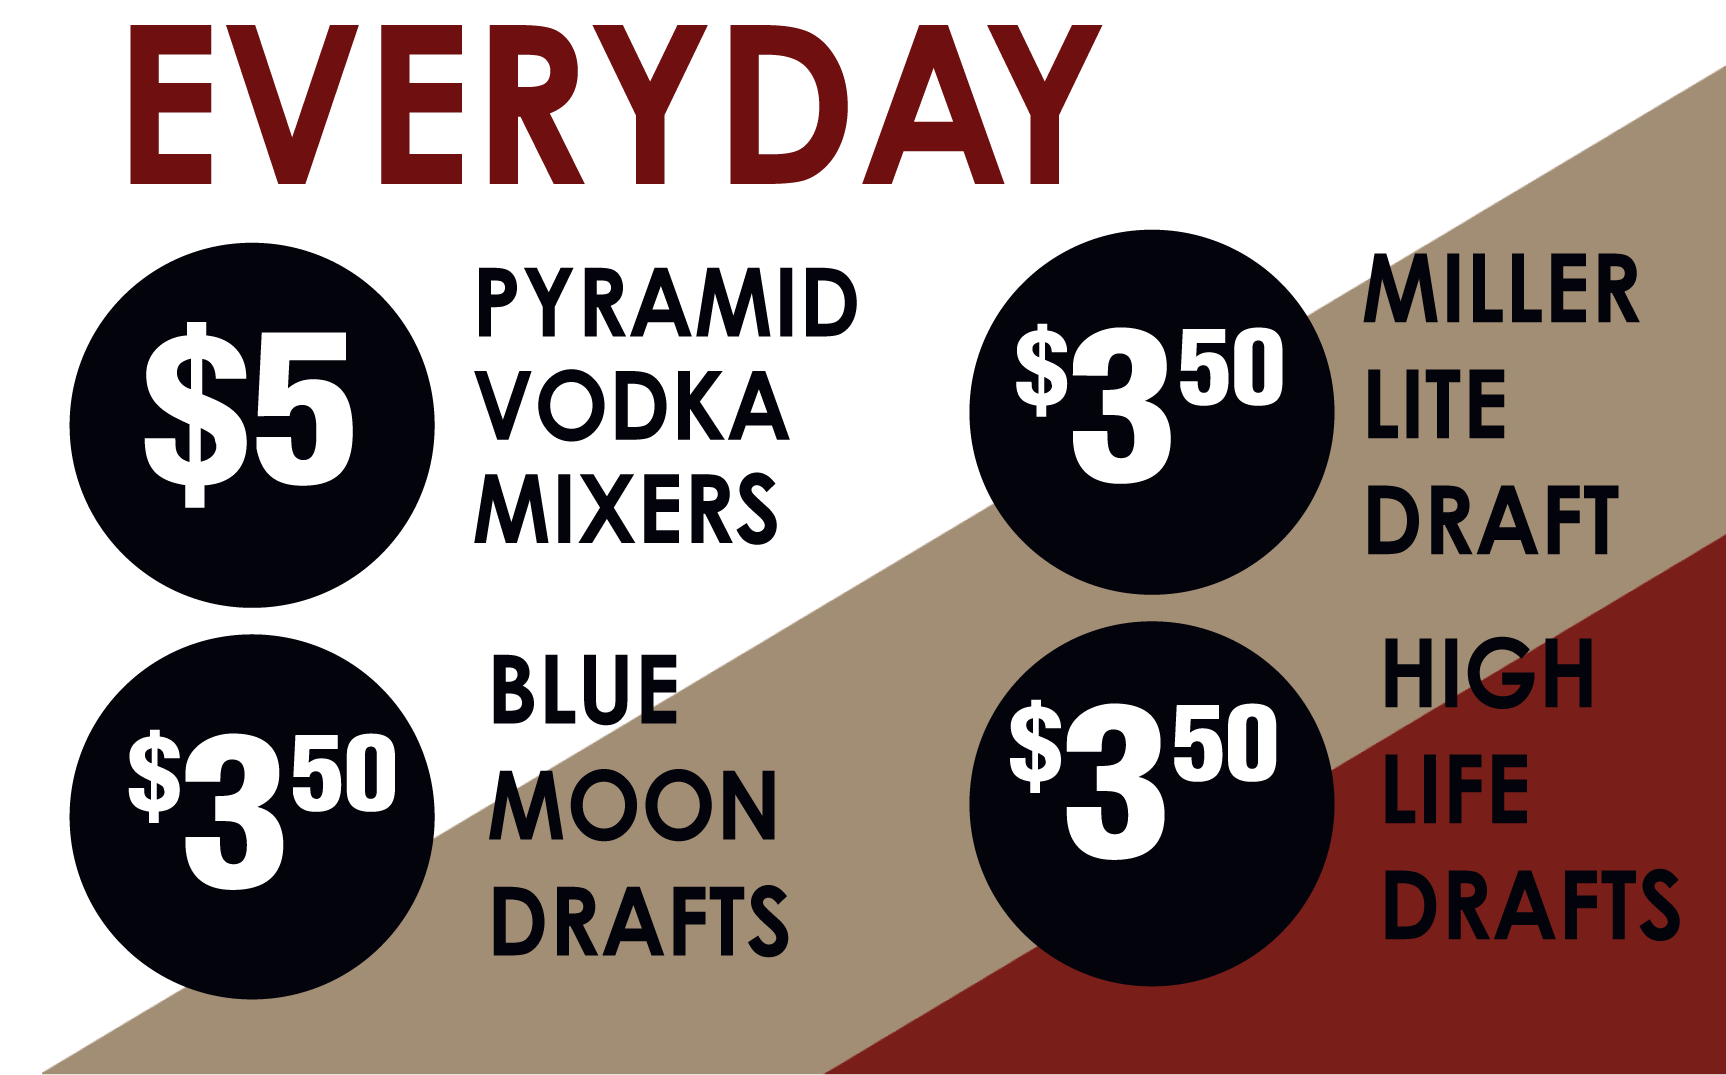 Daily Drink Specials